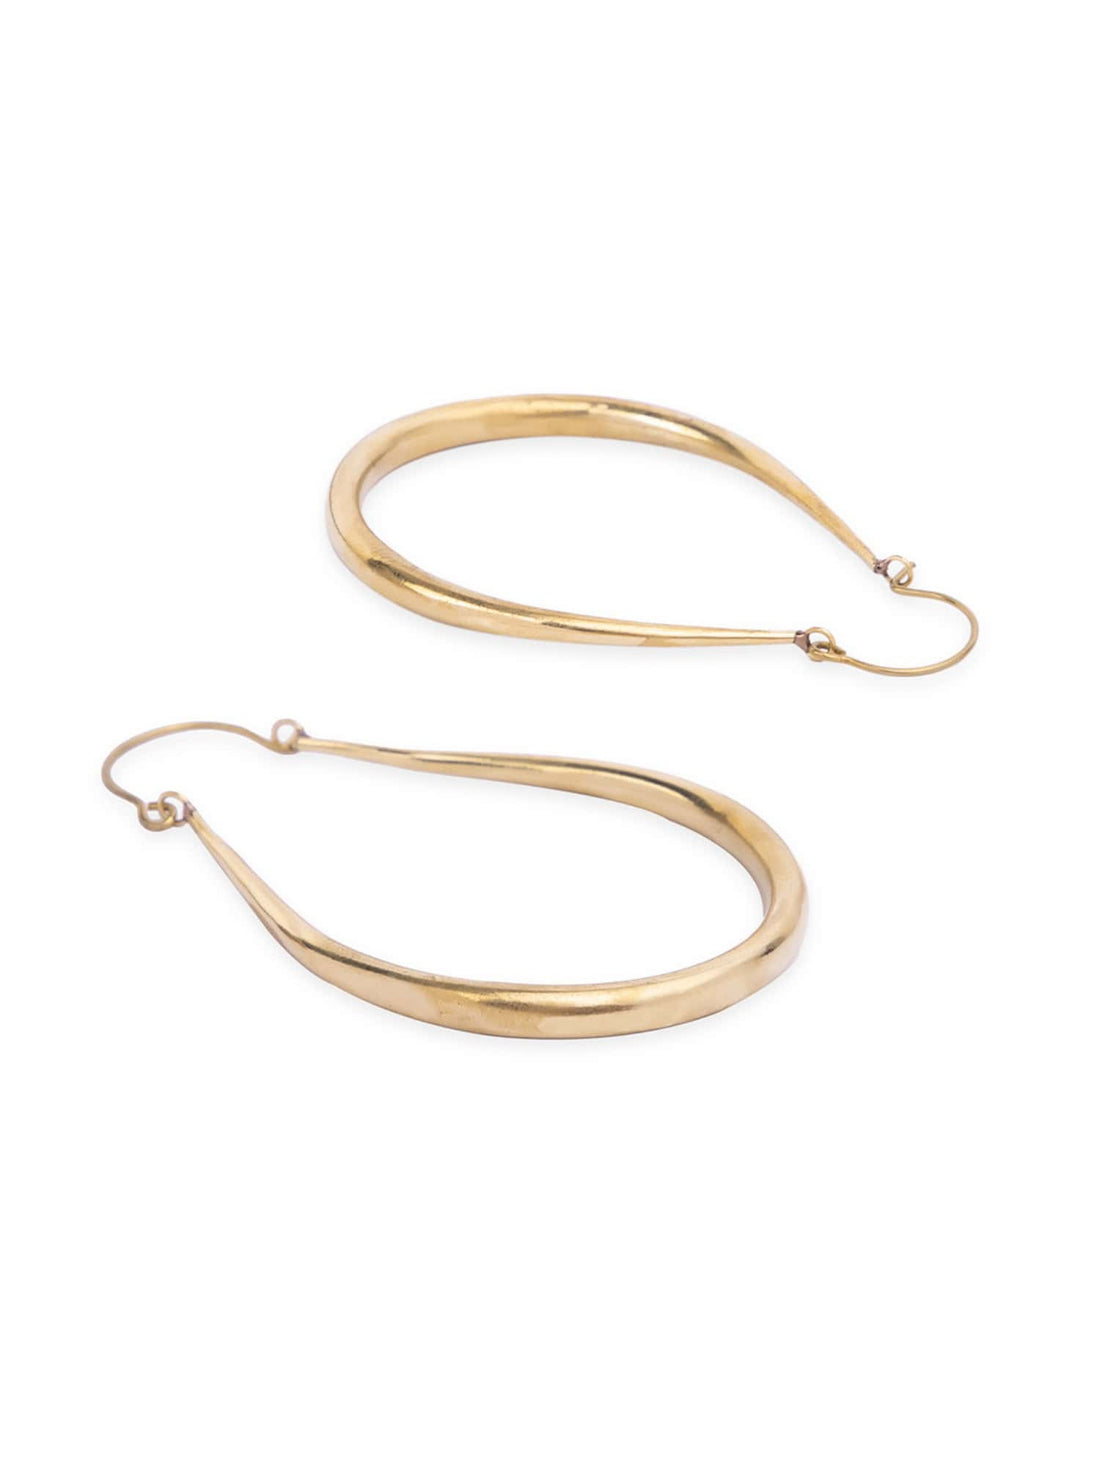 Daily Wear Hoops Earrings - Minimal Gold and Silver-Plated Brass Earrings By Studio One Love